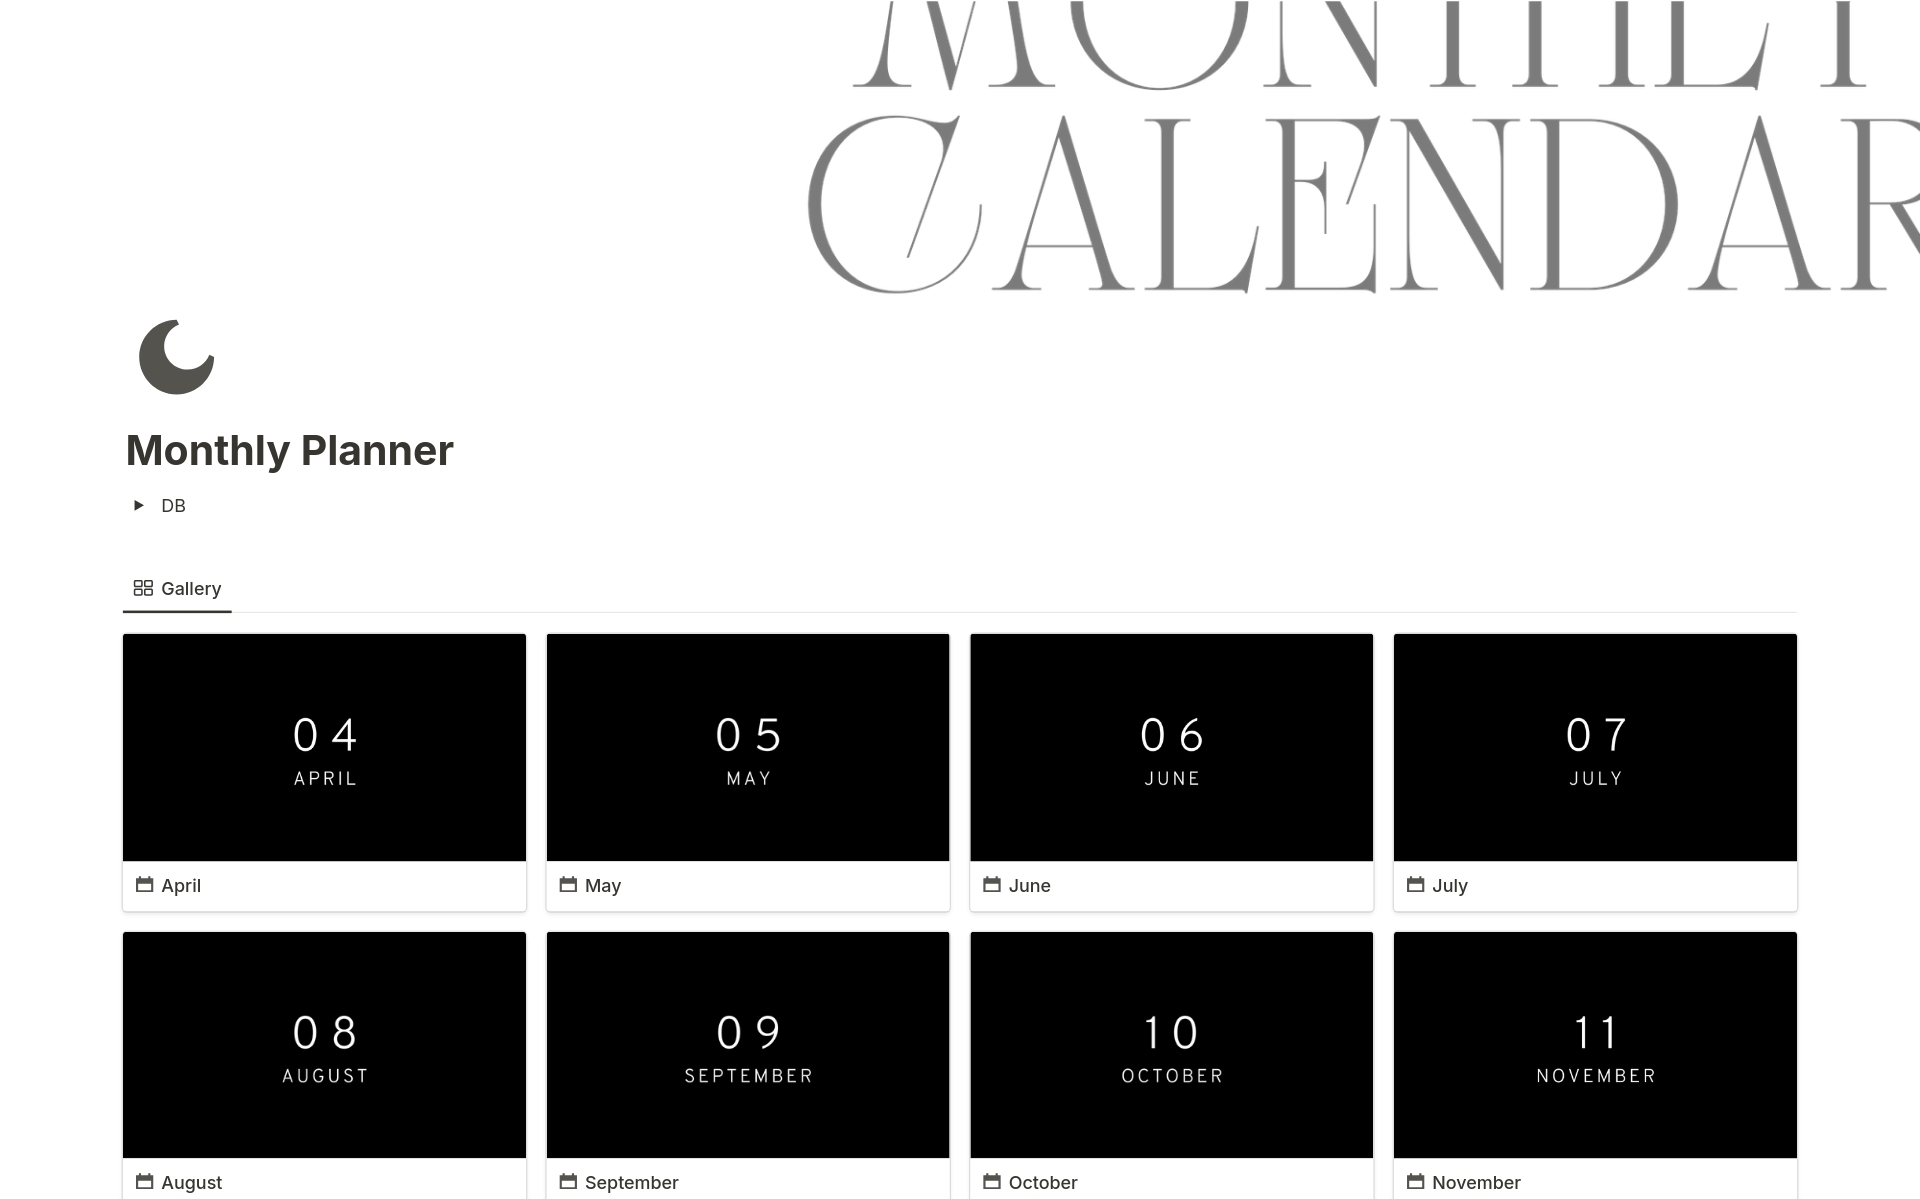 (For Notion dark mode users) The Notion Monthly Planner is a simple tool for organization and productivity. With this planner, you can confidently plan your goals, one month at a time, and turn chaos into clarity.